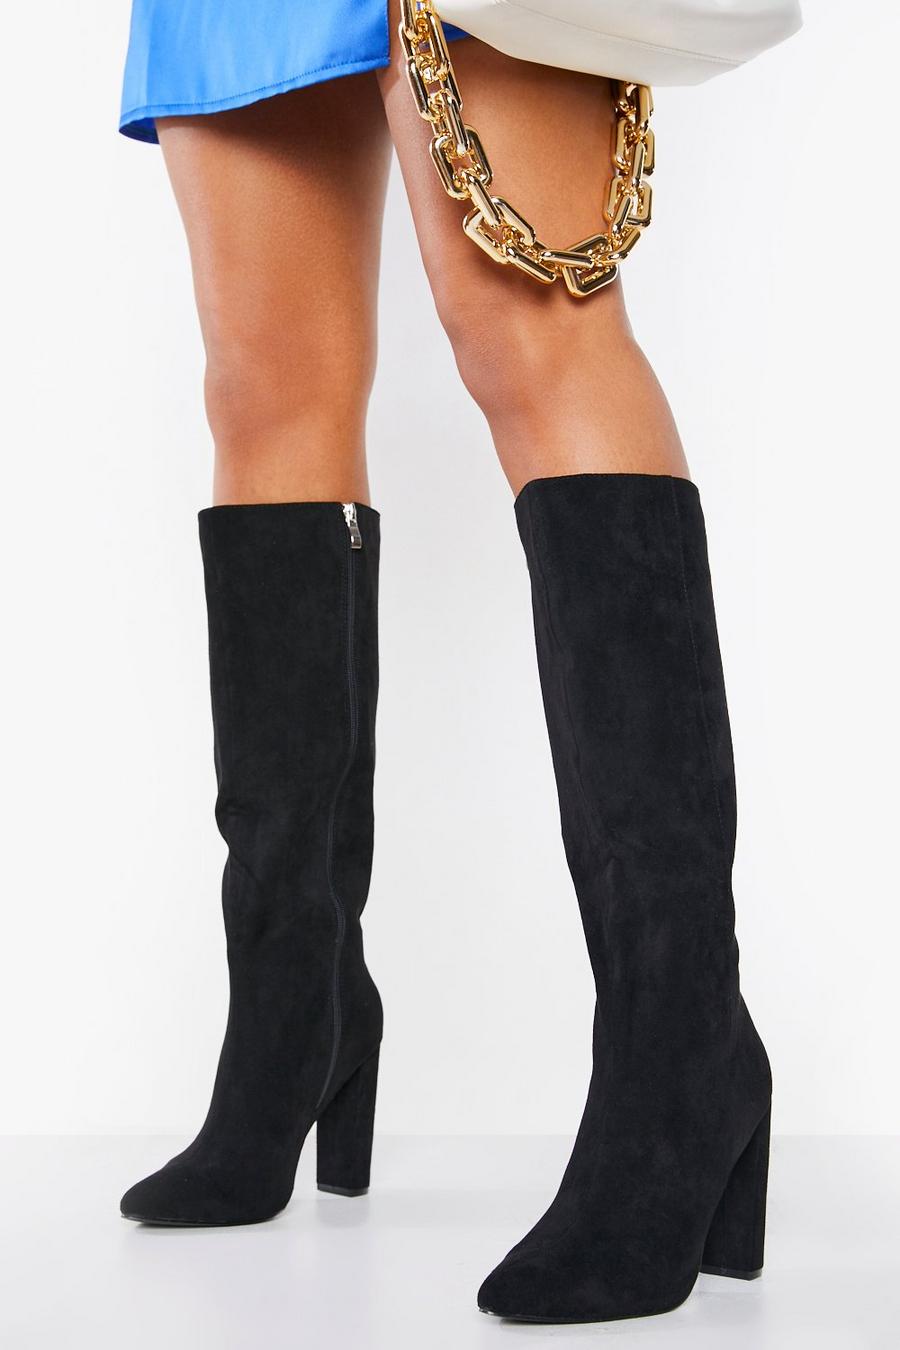 Black Pointed Knee High Heeled Boots